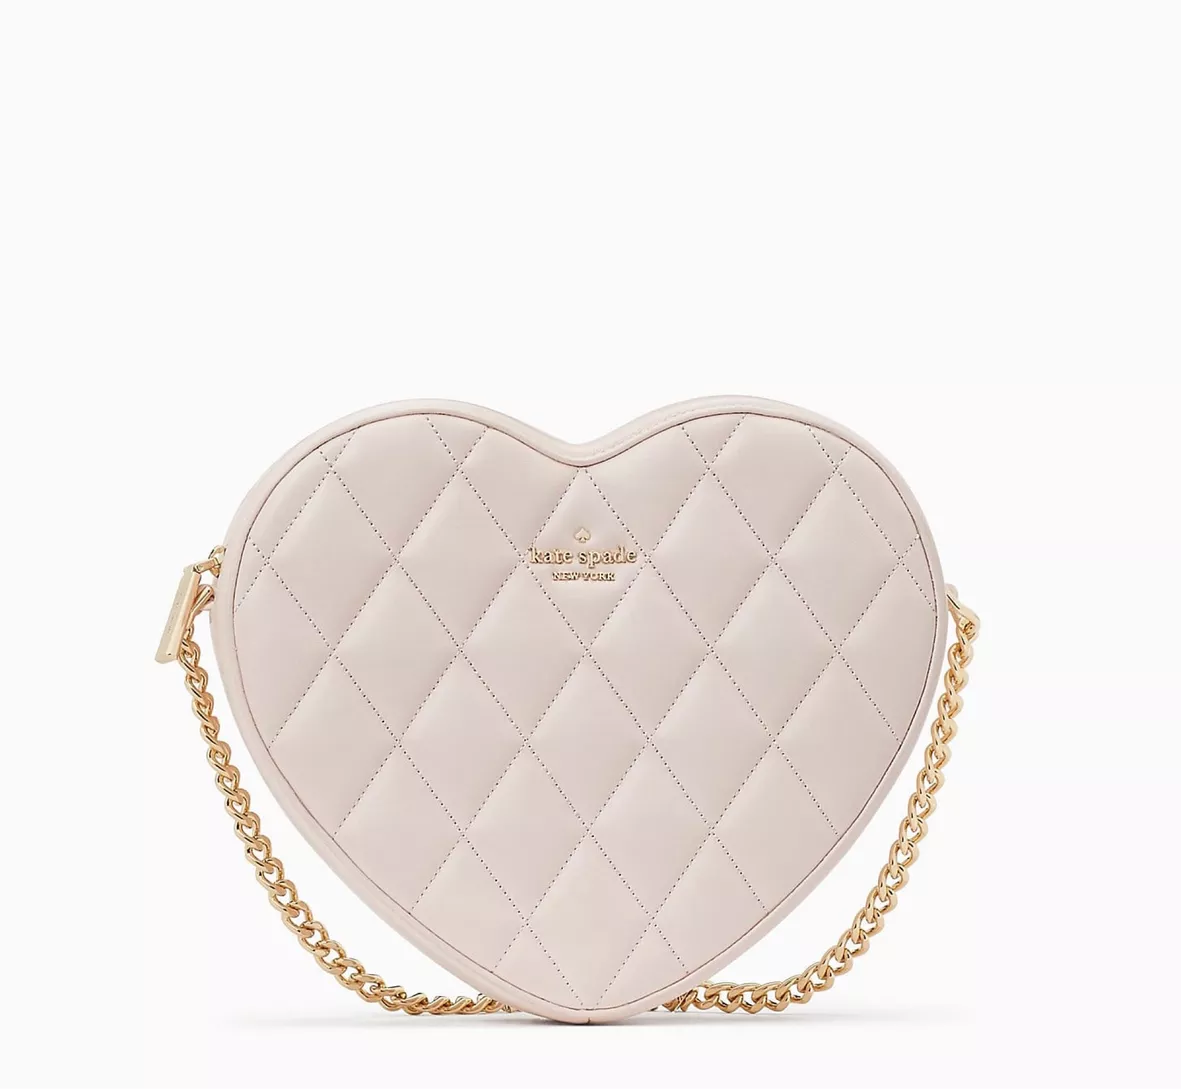 PINK CHANEL HEART BAG UNBOXING